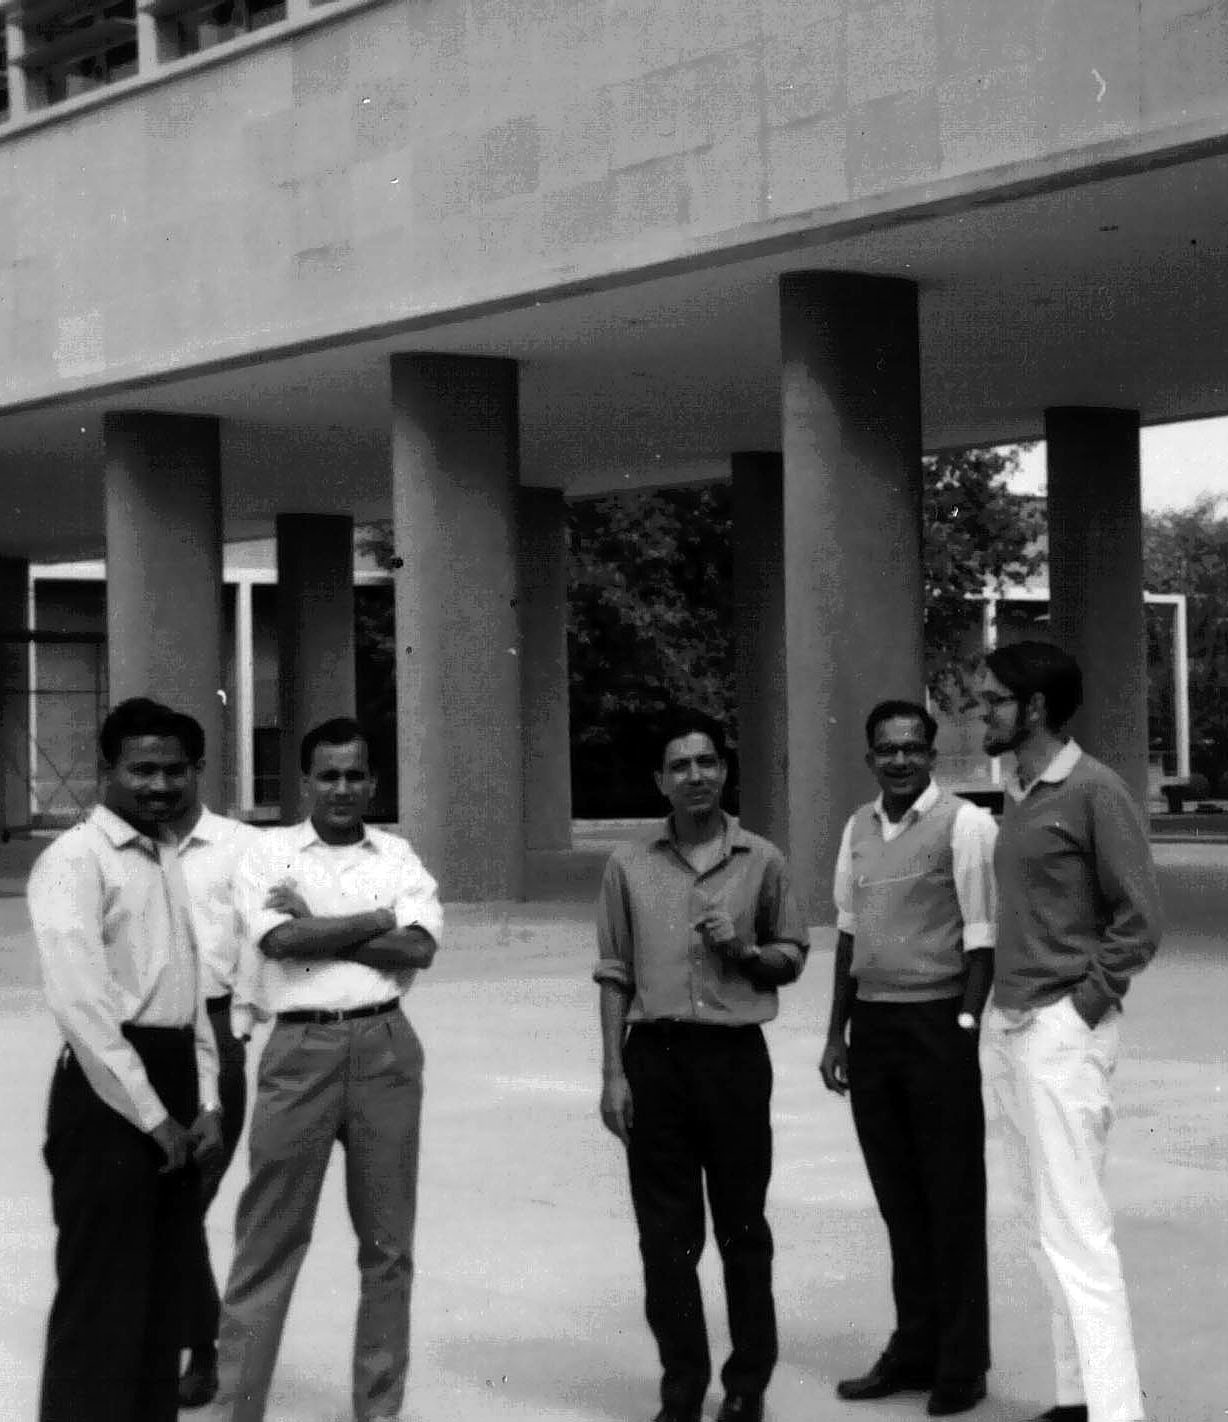 DM and colleagues in front of the TIFR